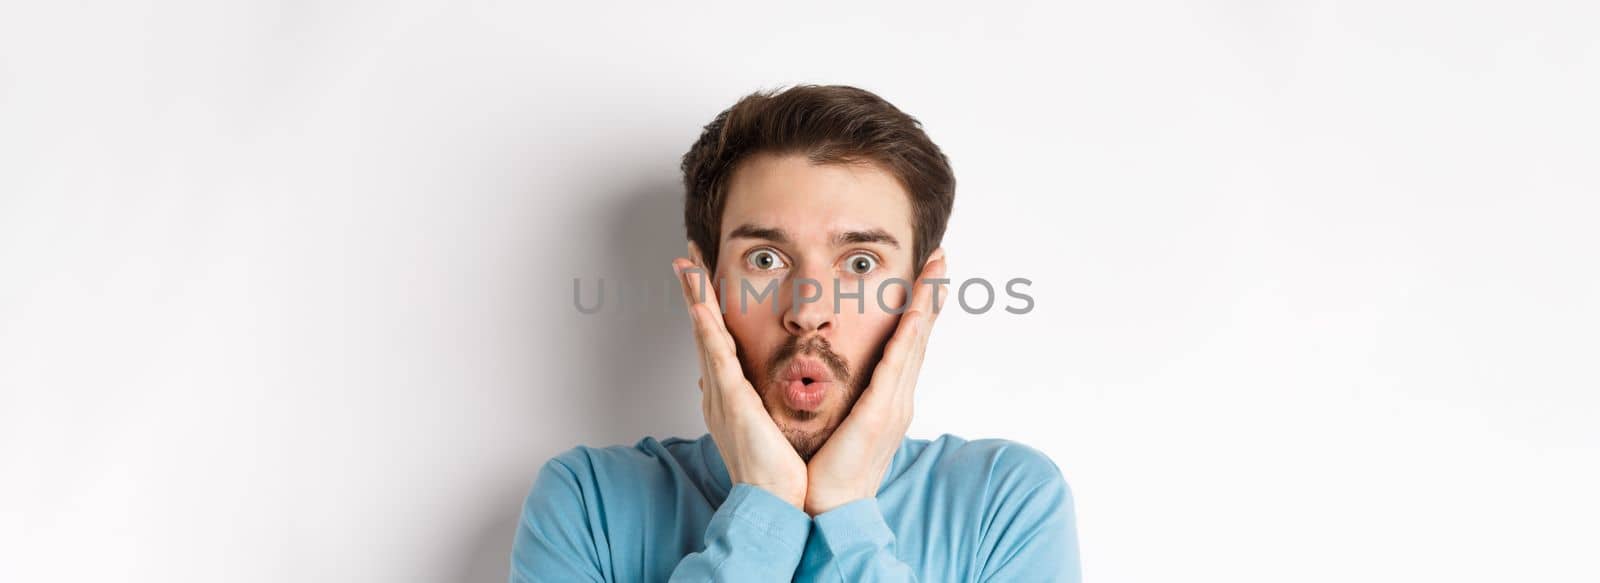 Close-up of impressed man checking out special offer, saying wow and touching face with amazed expression, stare at camera in awe, standing over white background.